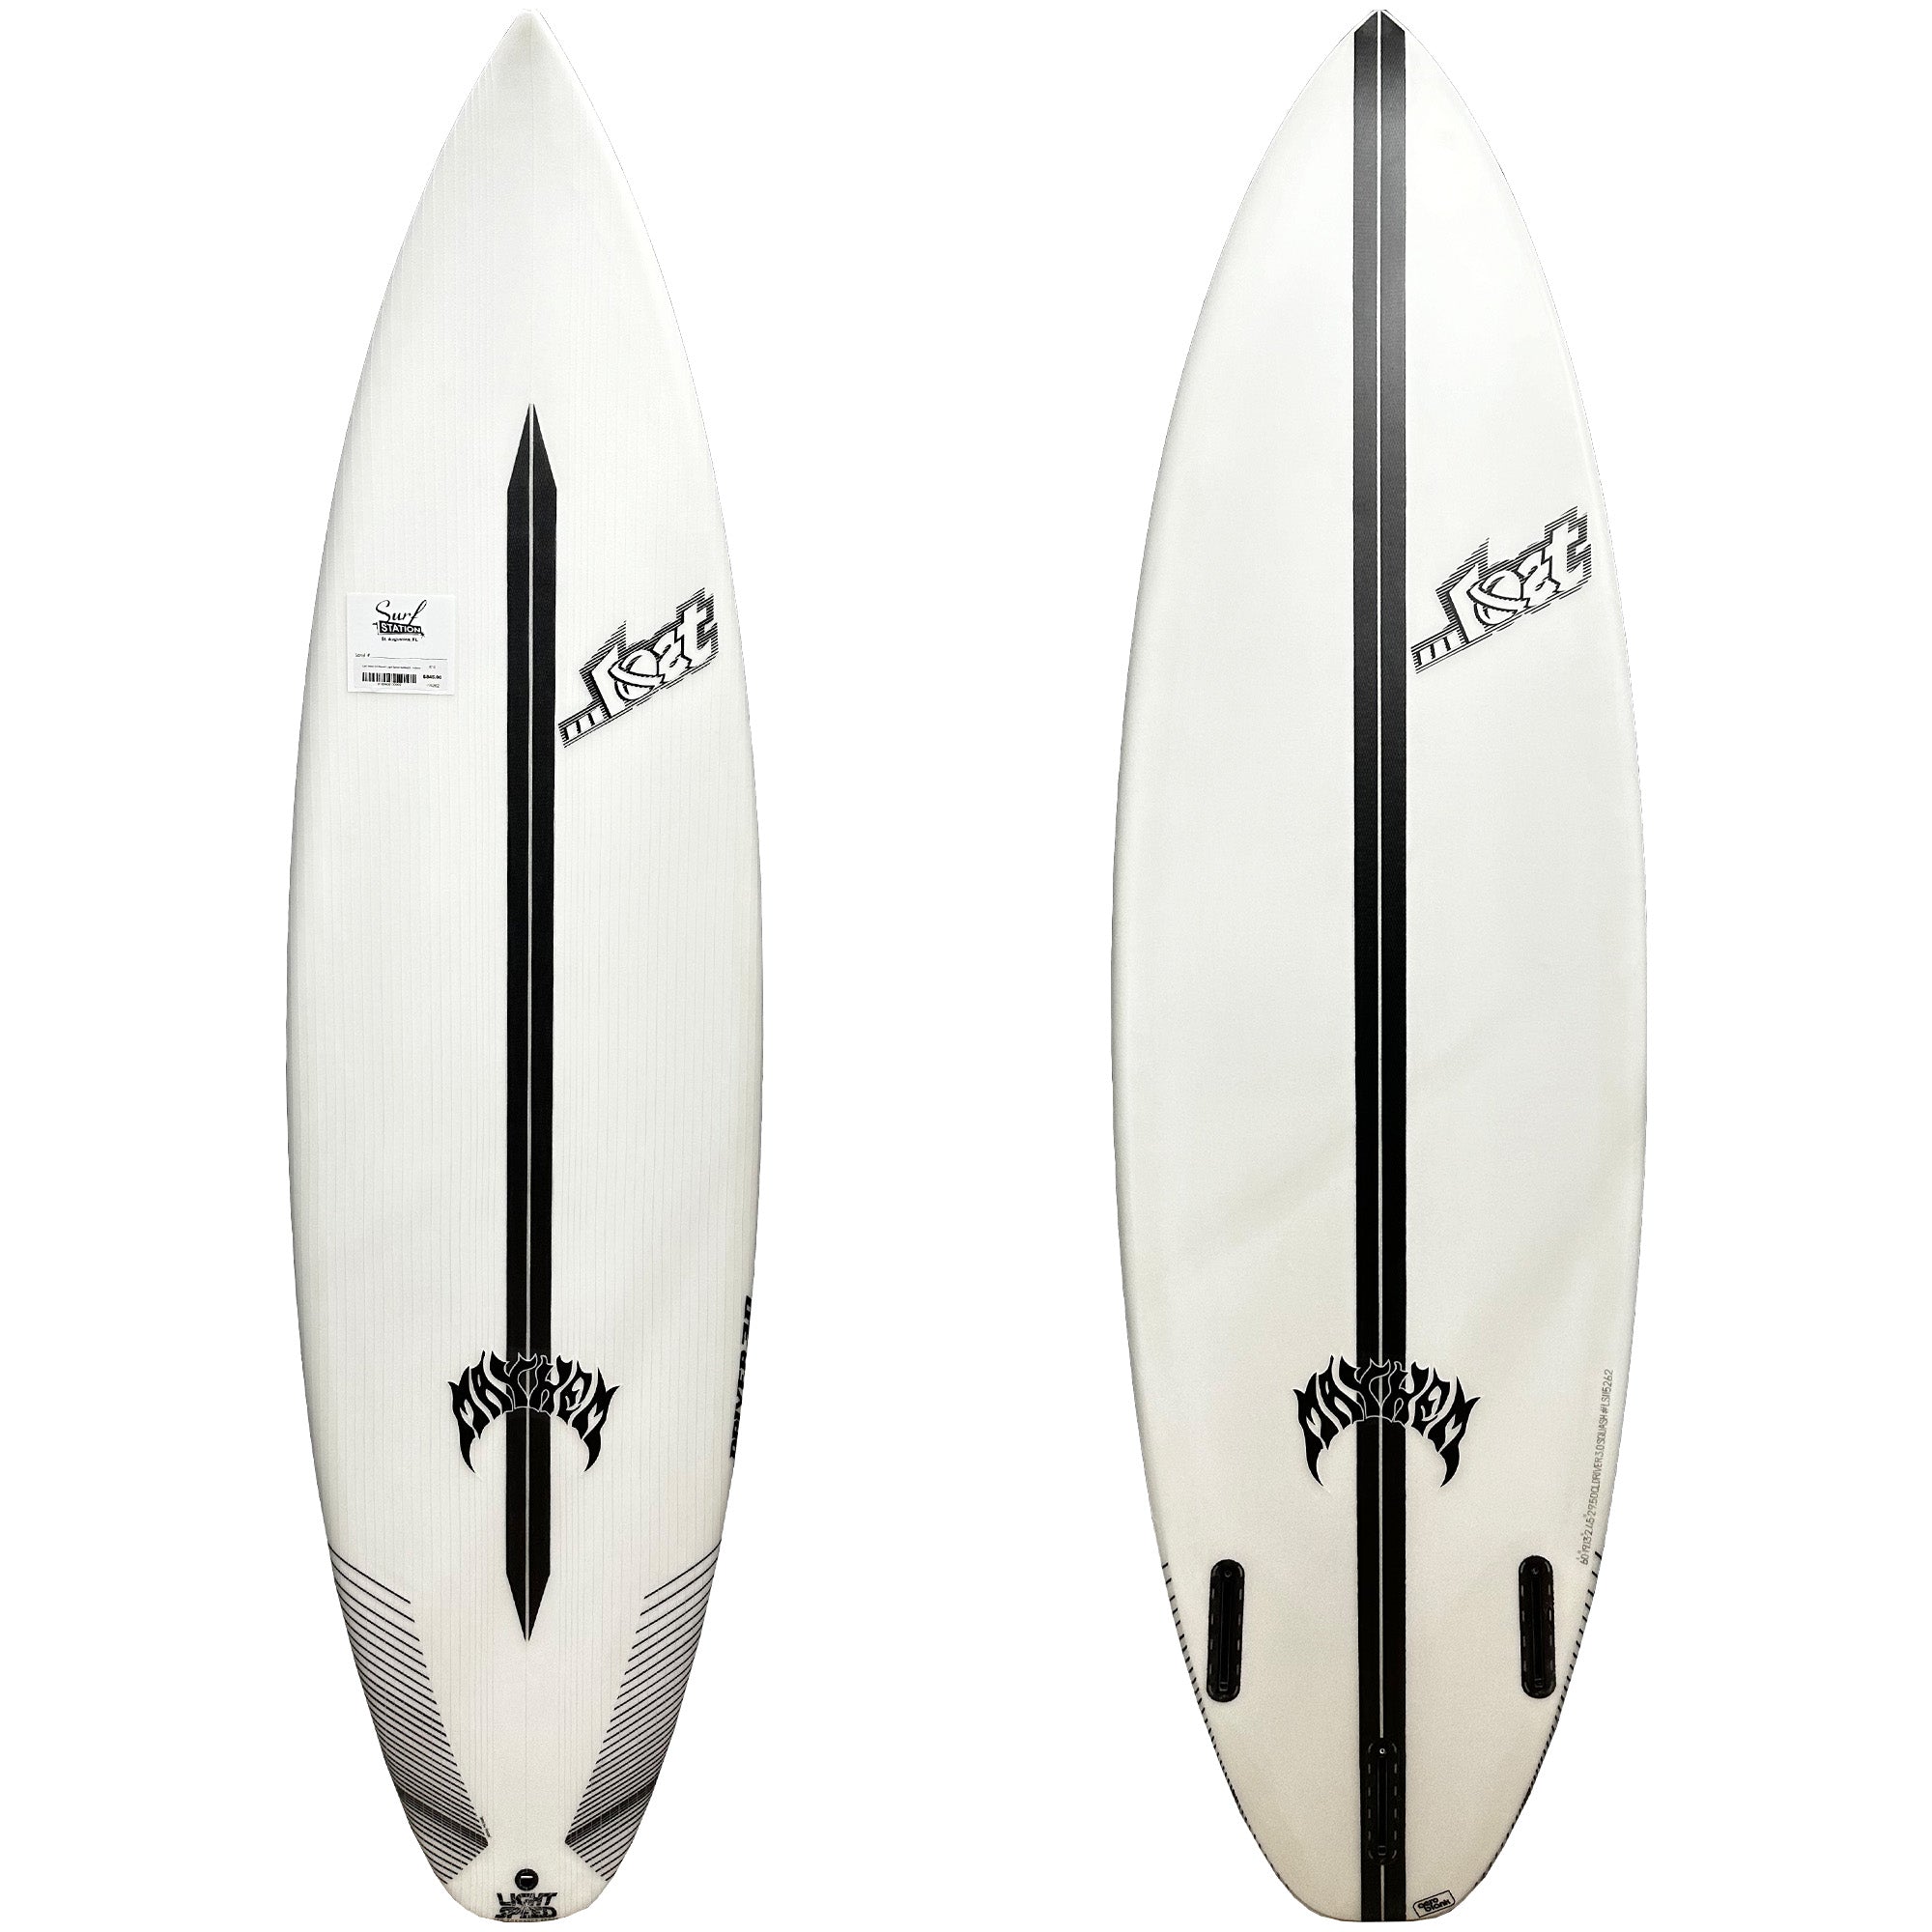 Lost Driver 3.0 Squash Light Speed Surfboard - Futures